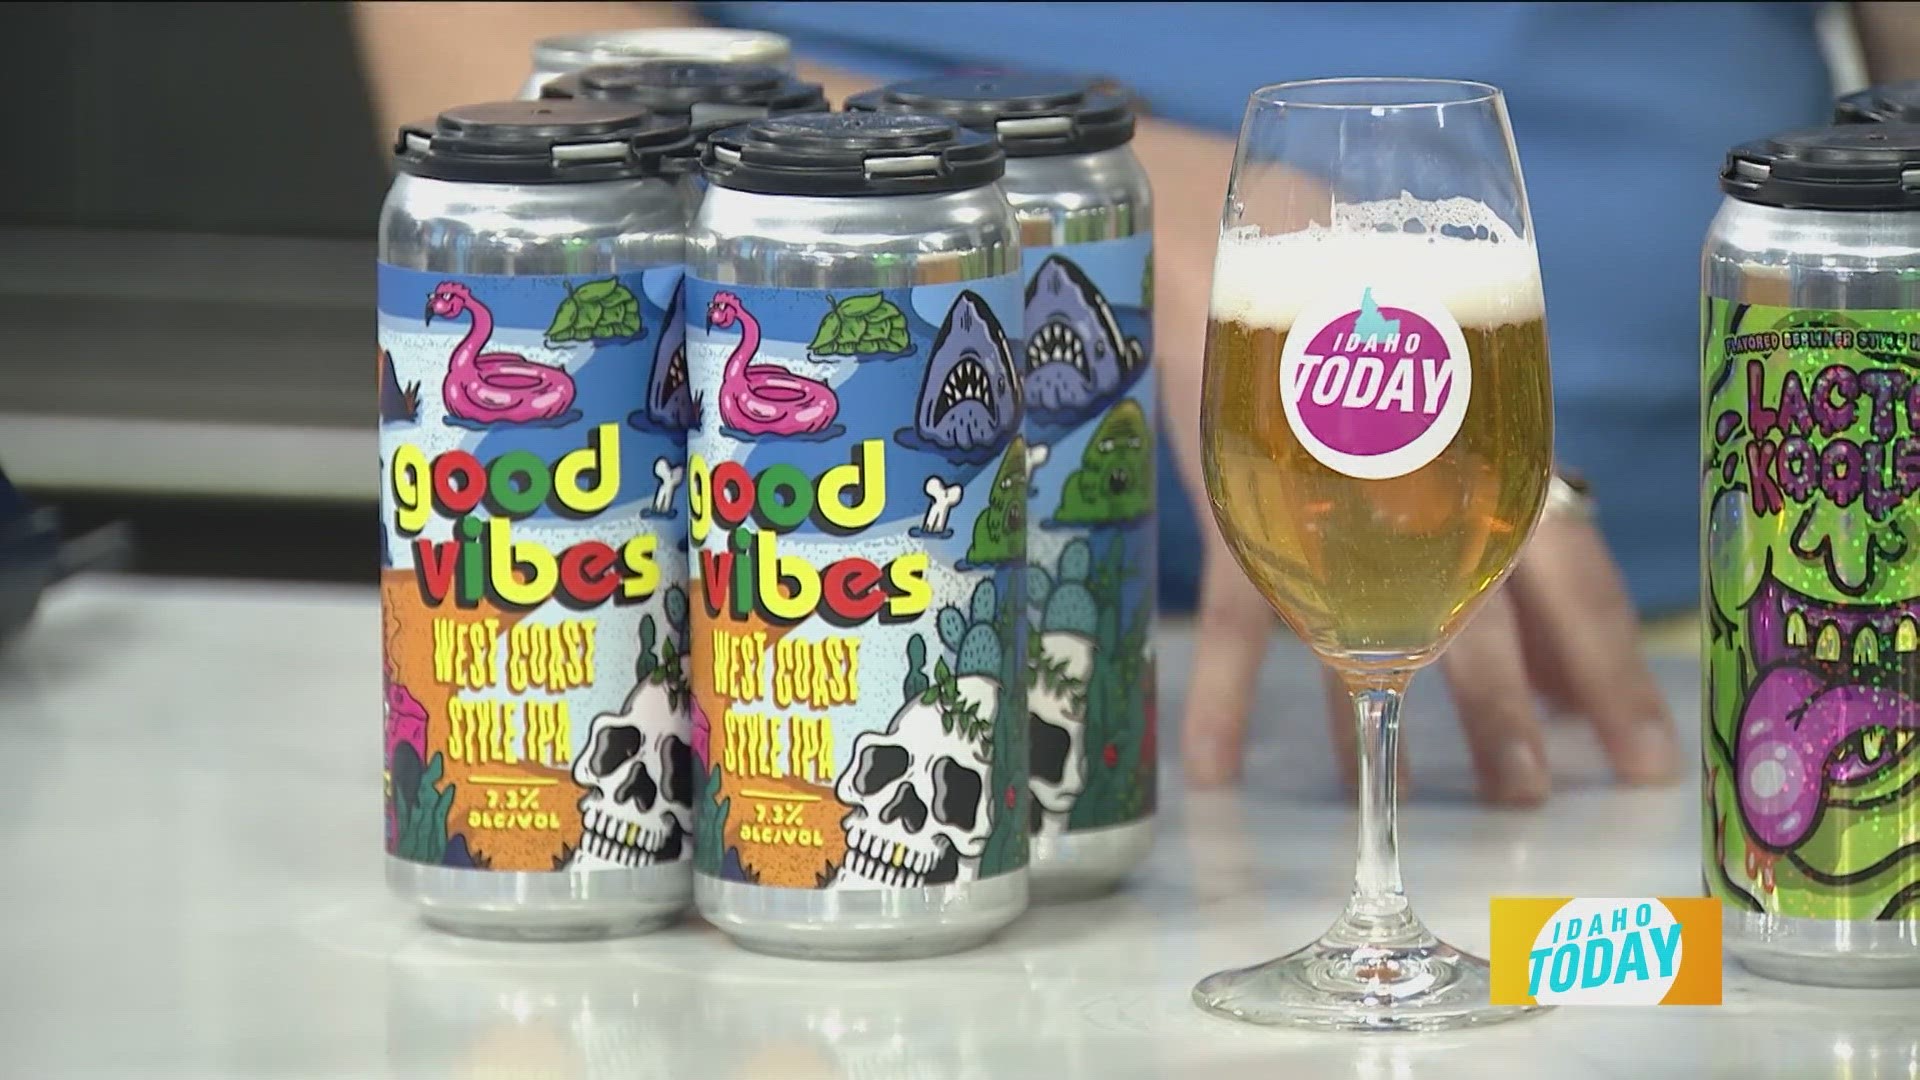 Sunday is national beer day and Idaho Today’s Mellisa Paul is joined by a local brewery to share some of the ways you can pair your favorite beverage!